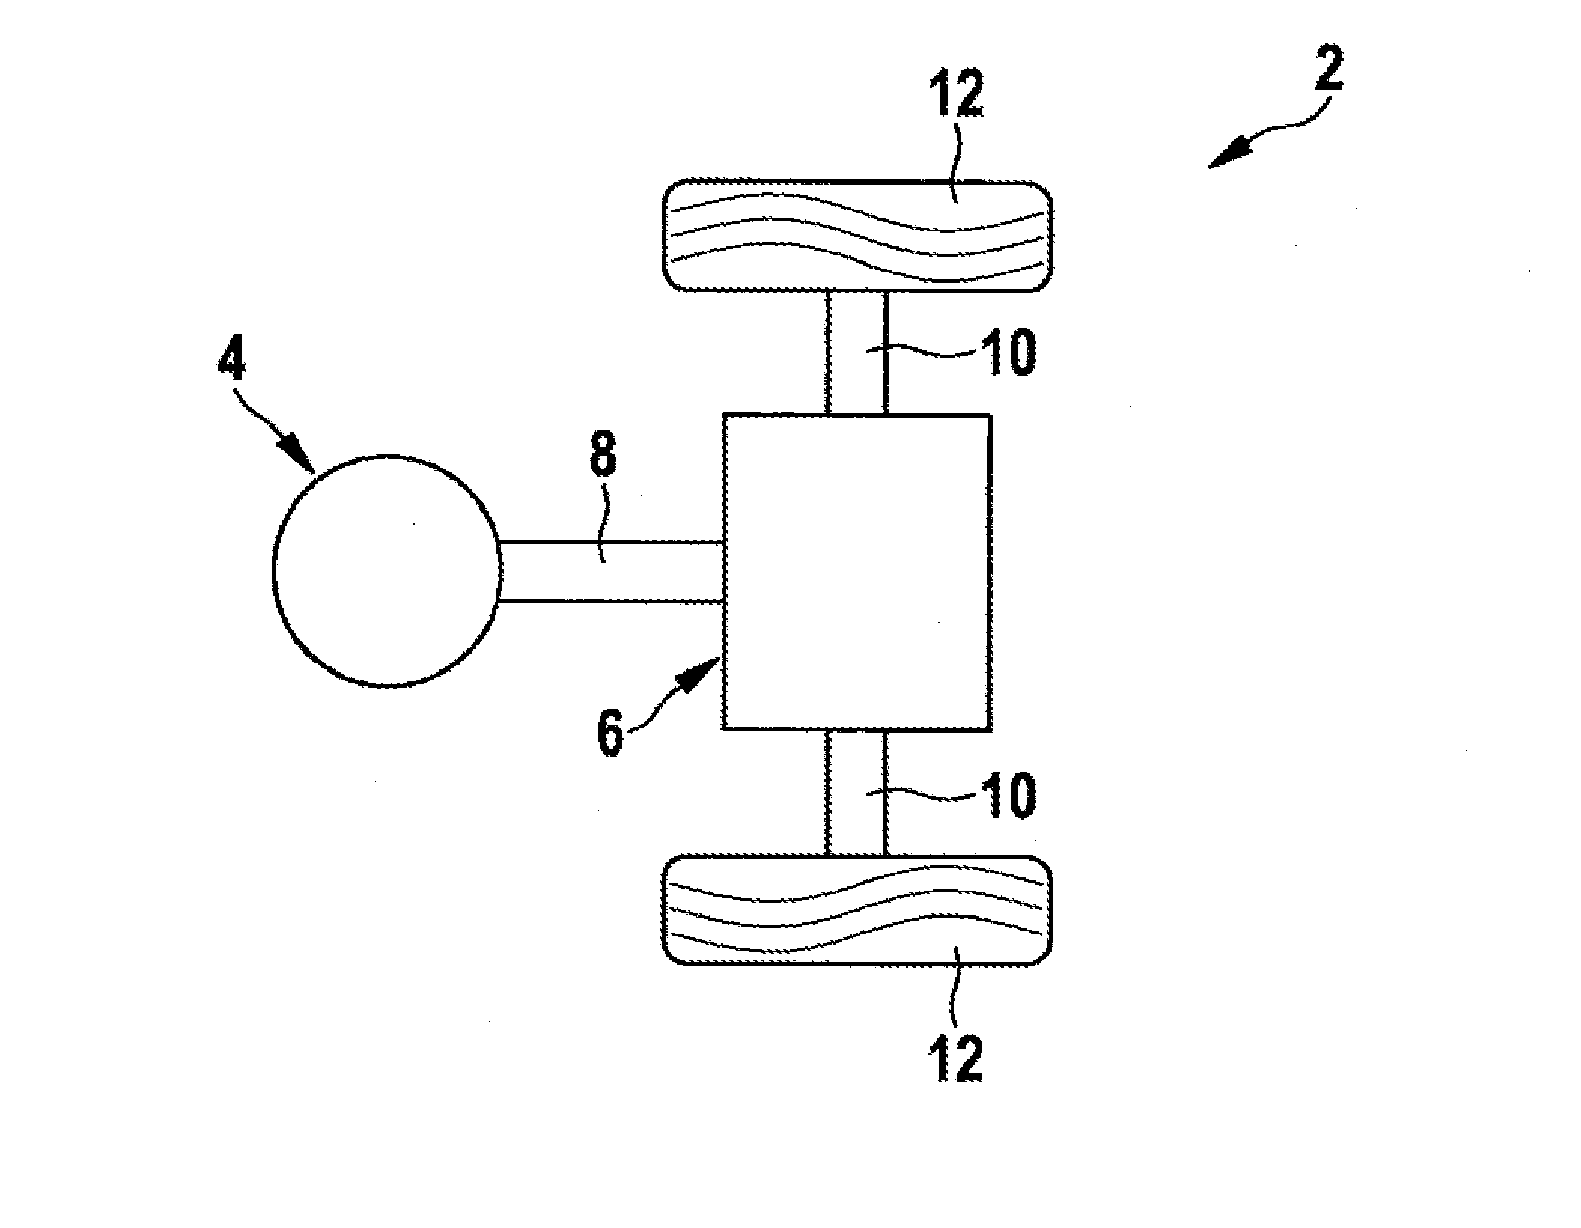 Active damping control for an electric vehicle or hybrid vehicle